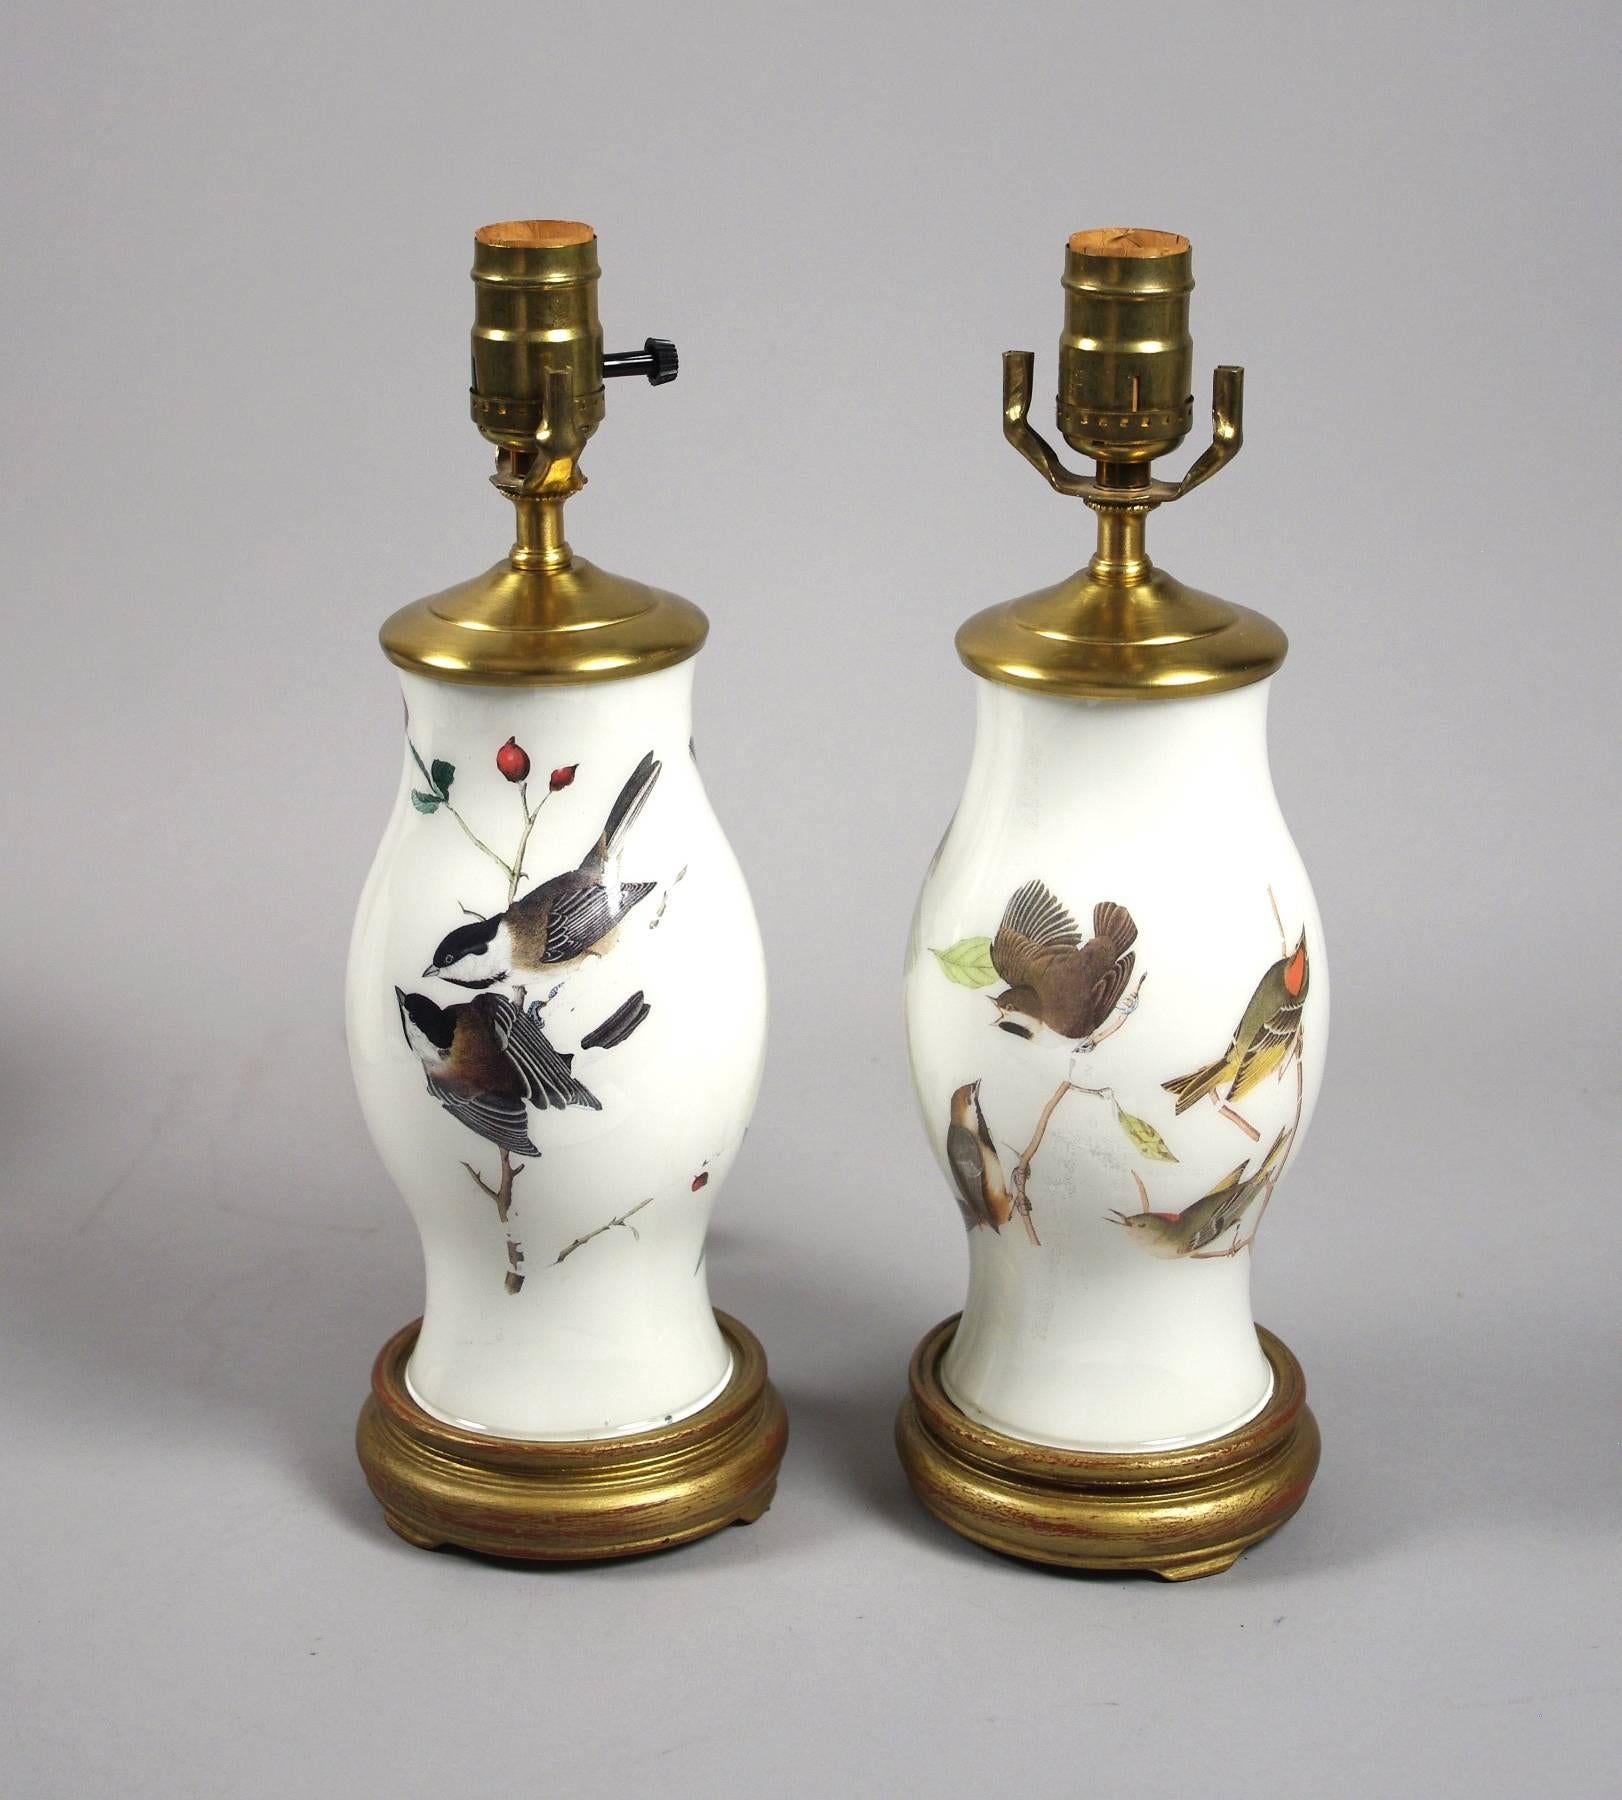 Pair of decoupage lamps, each decorated with finches and other small birds, on a creamy white ground.
9.5 